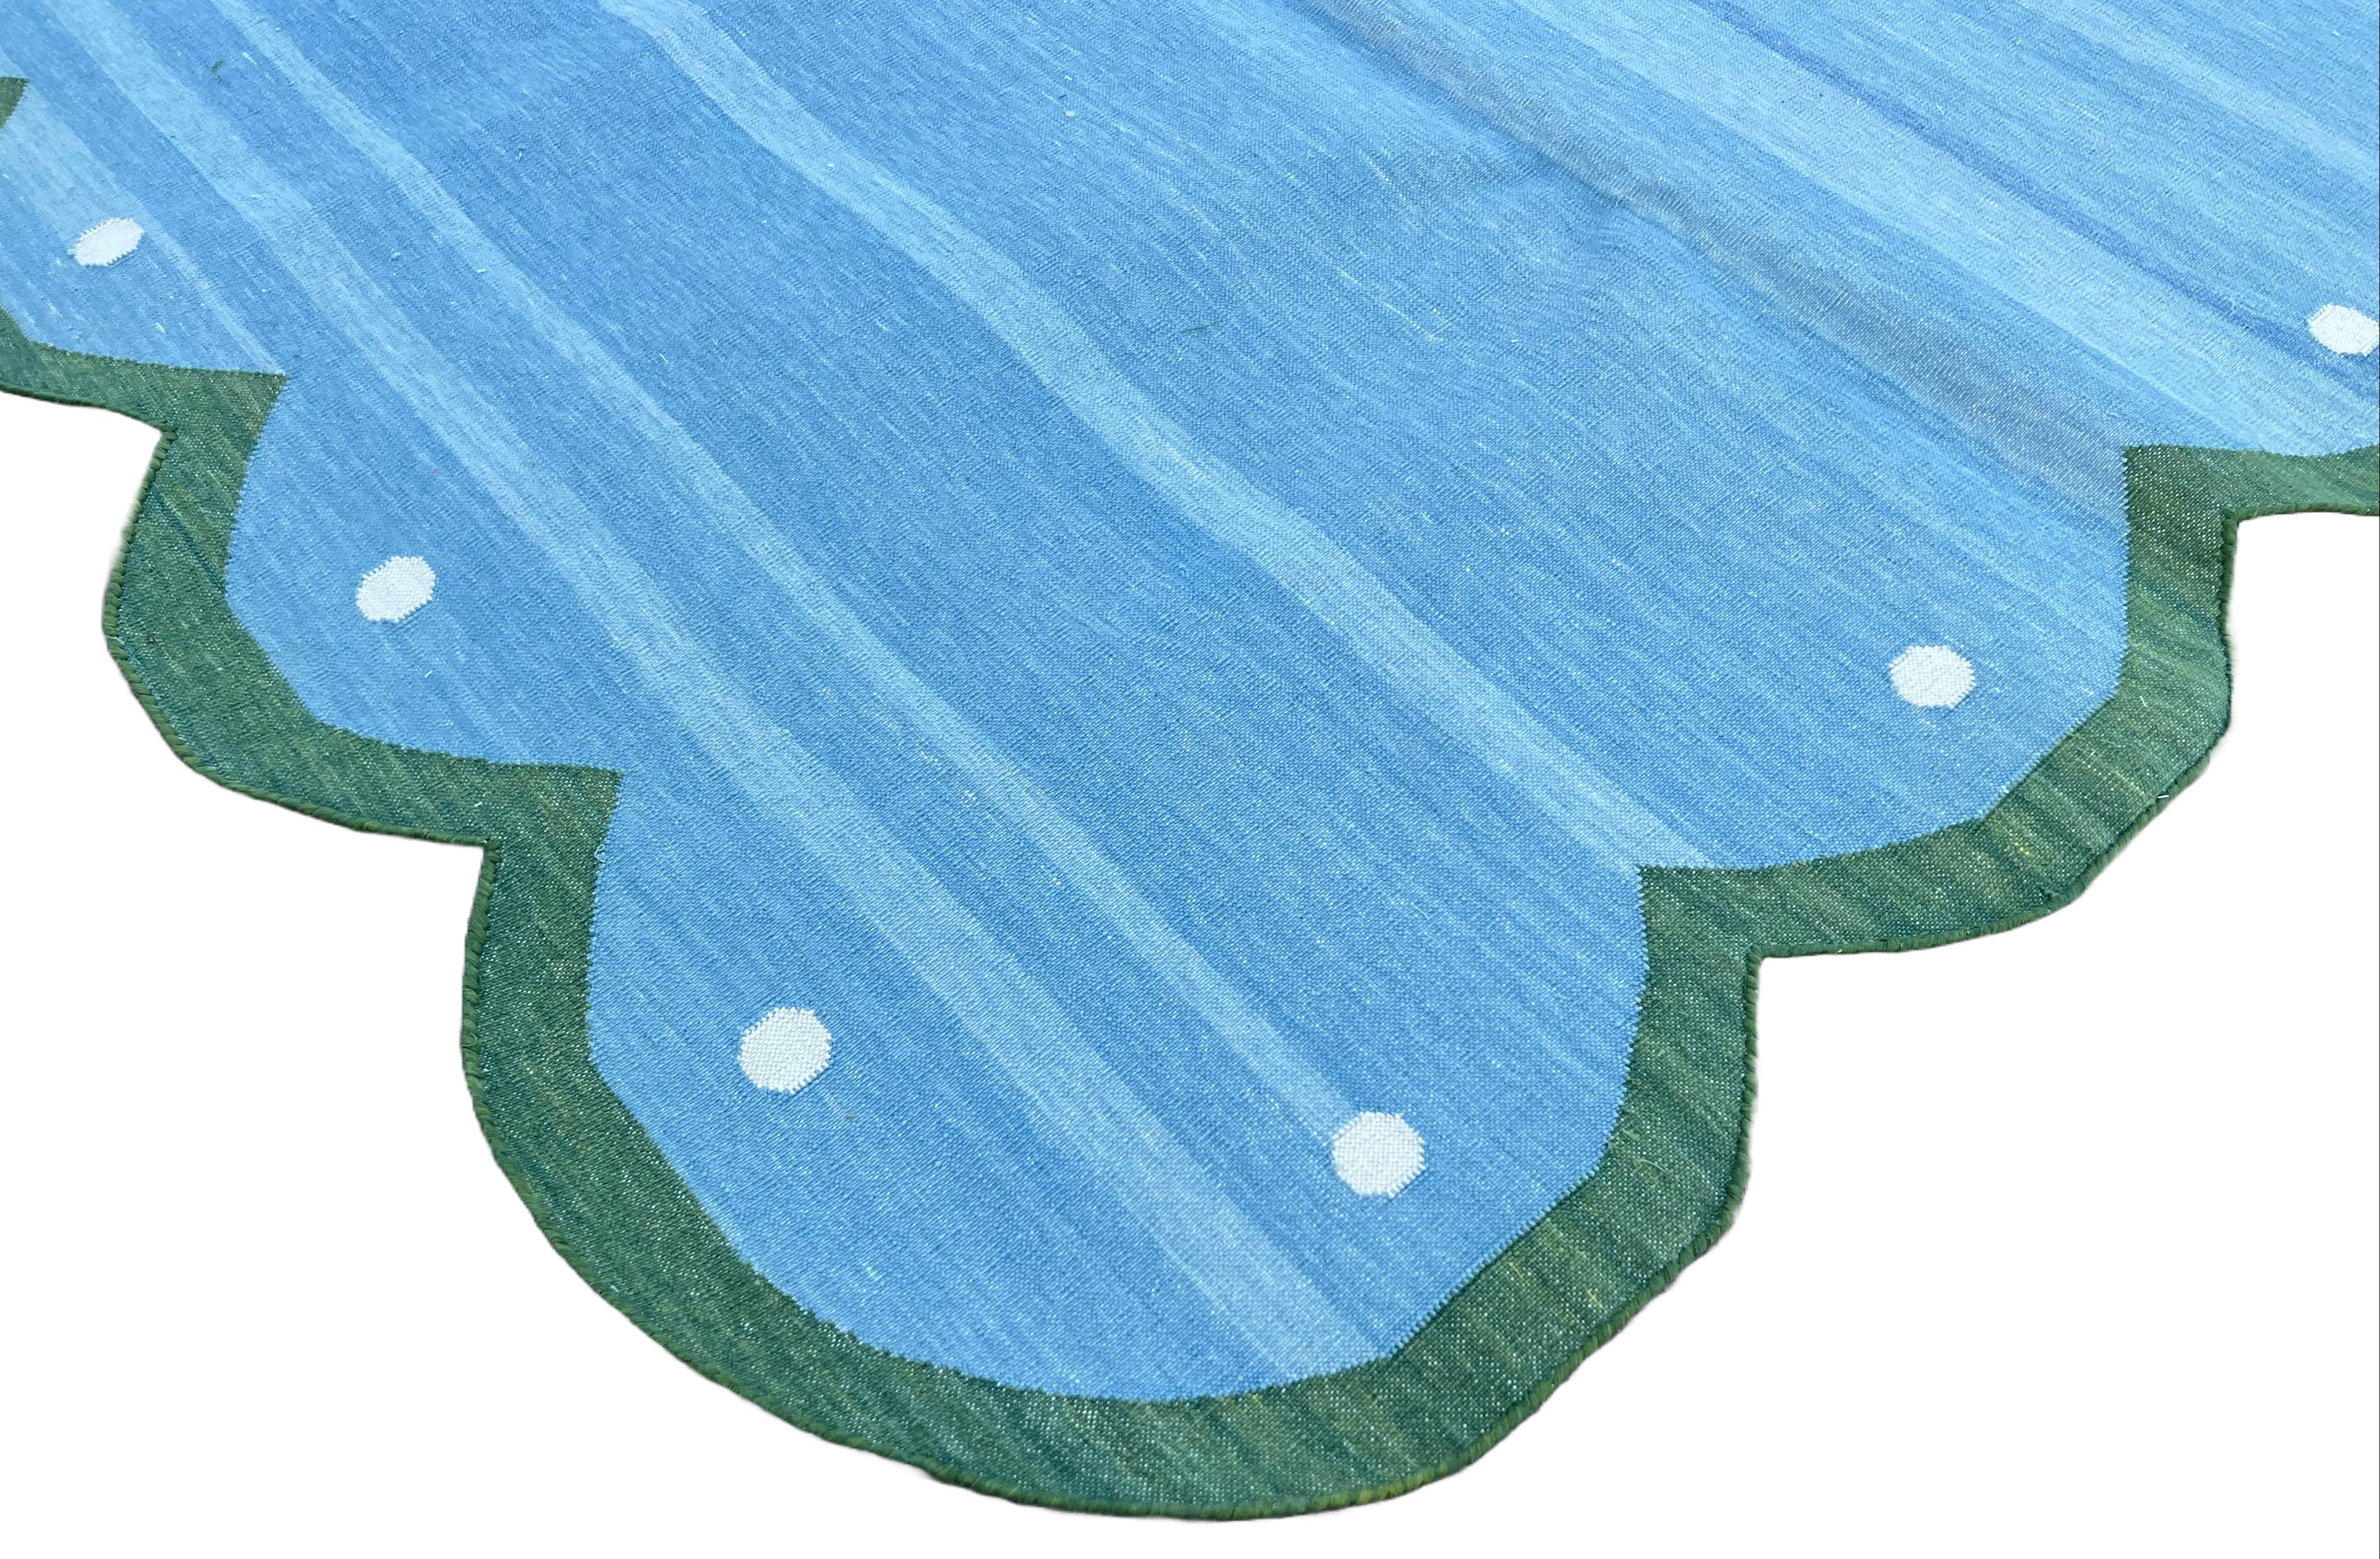 Mid-Century Modern Handmade Cotton Area Flat Weave Rug, Sky Blue And Green Scalloped Indian Dhurrie For Sale